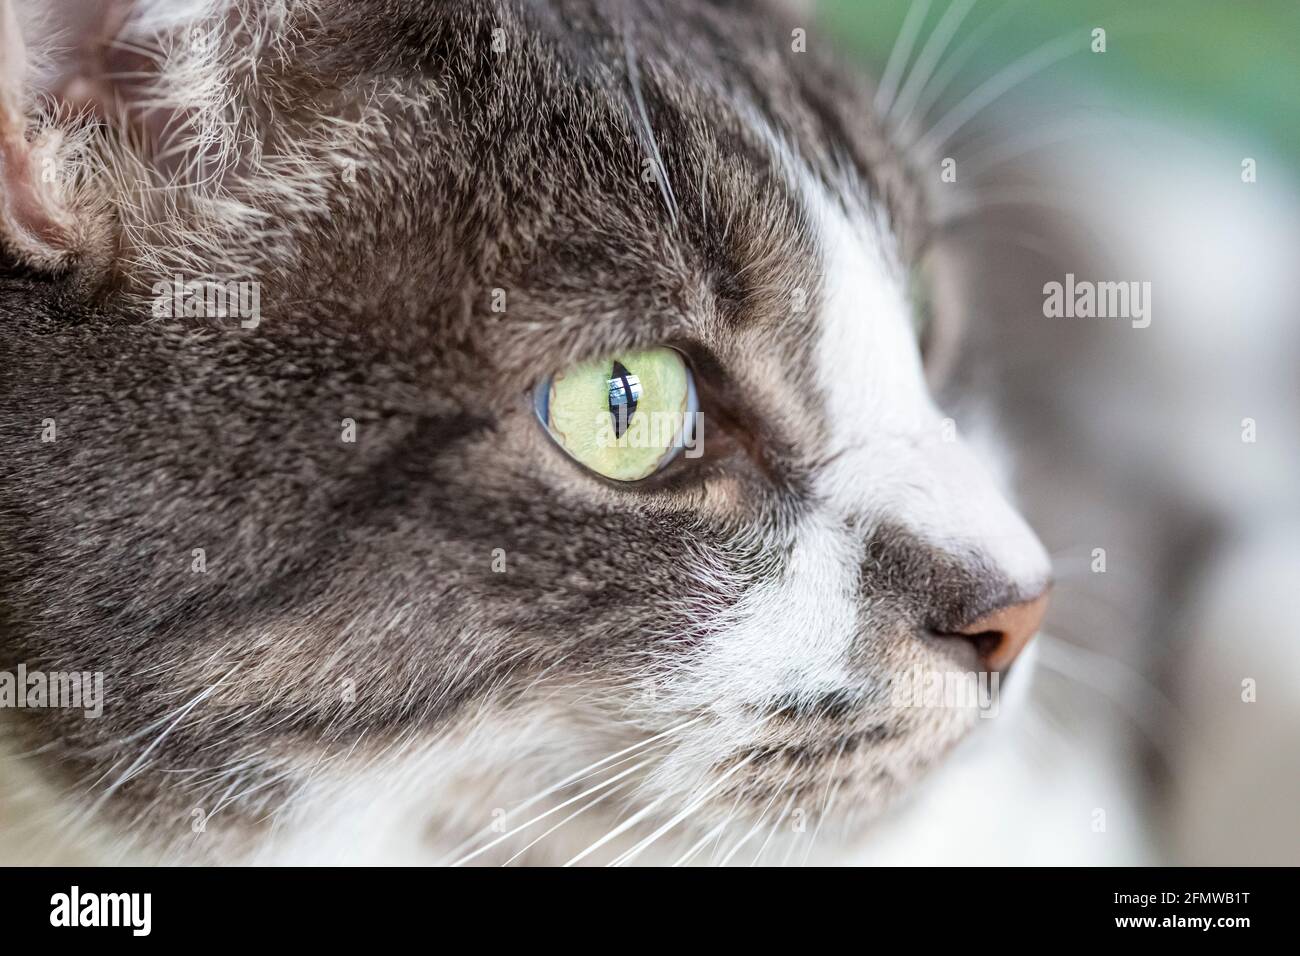 Close up profile of a Domestic Shorthair, striped grey and white tabby cat. Stock Photo